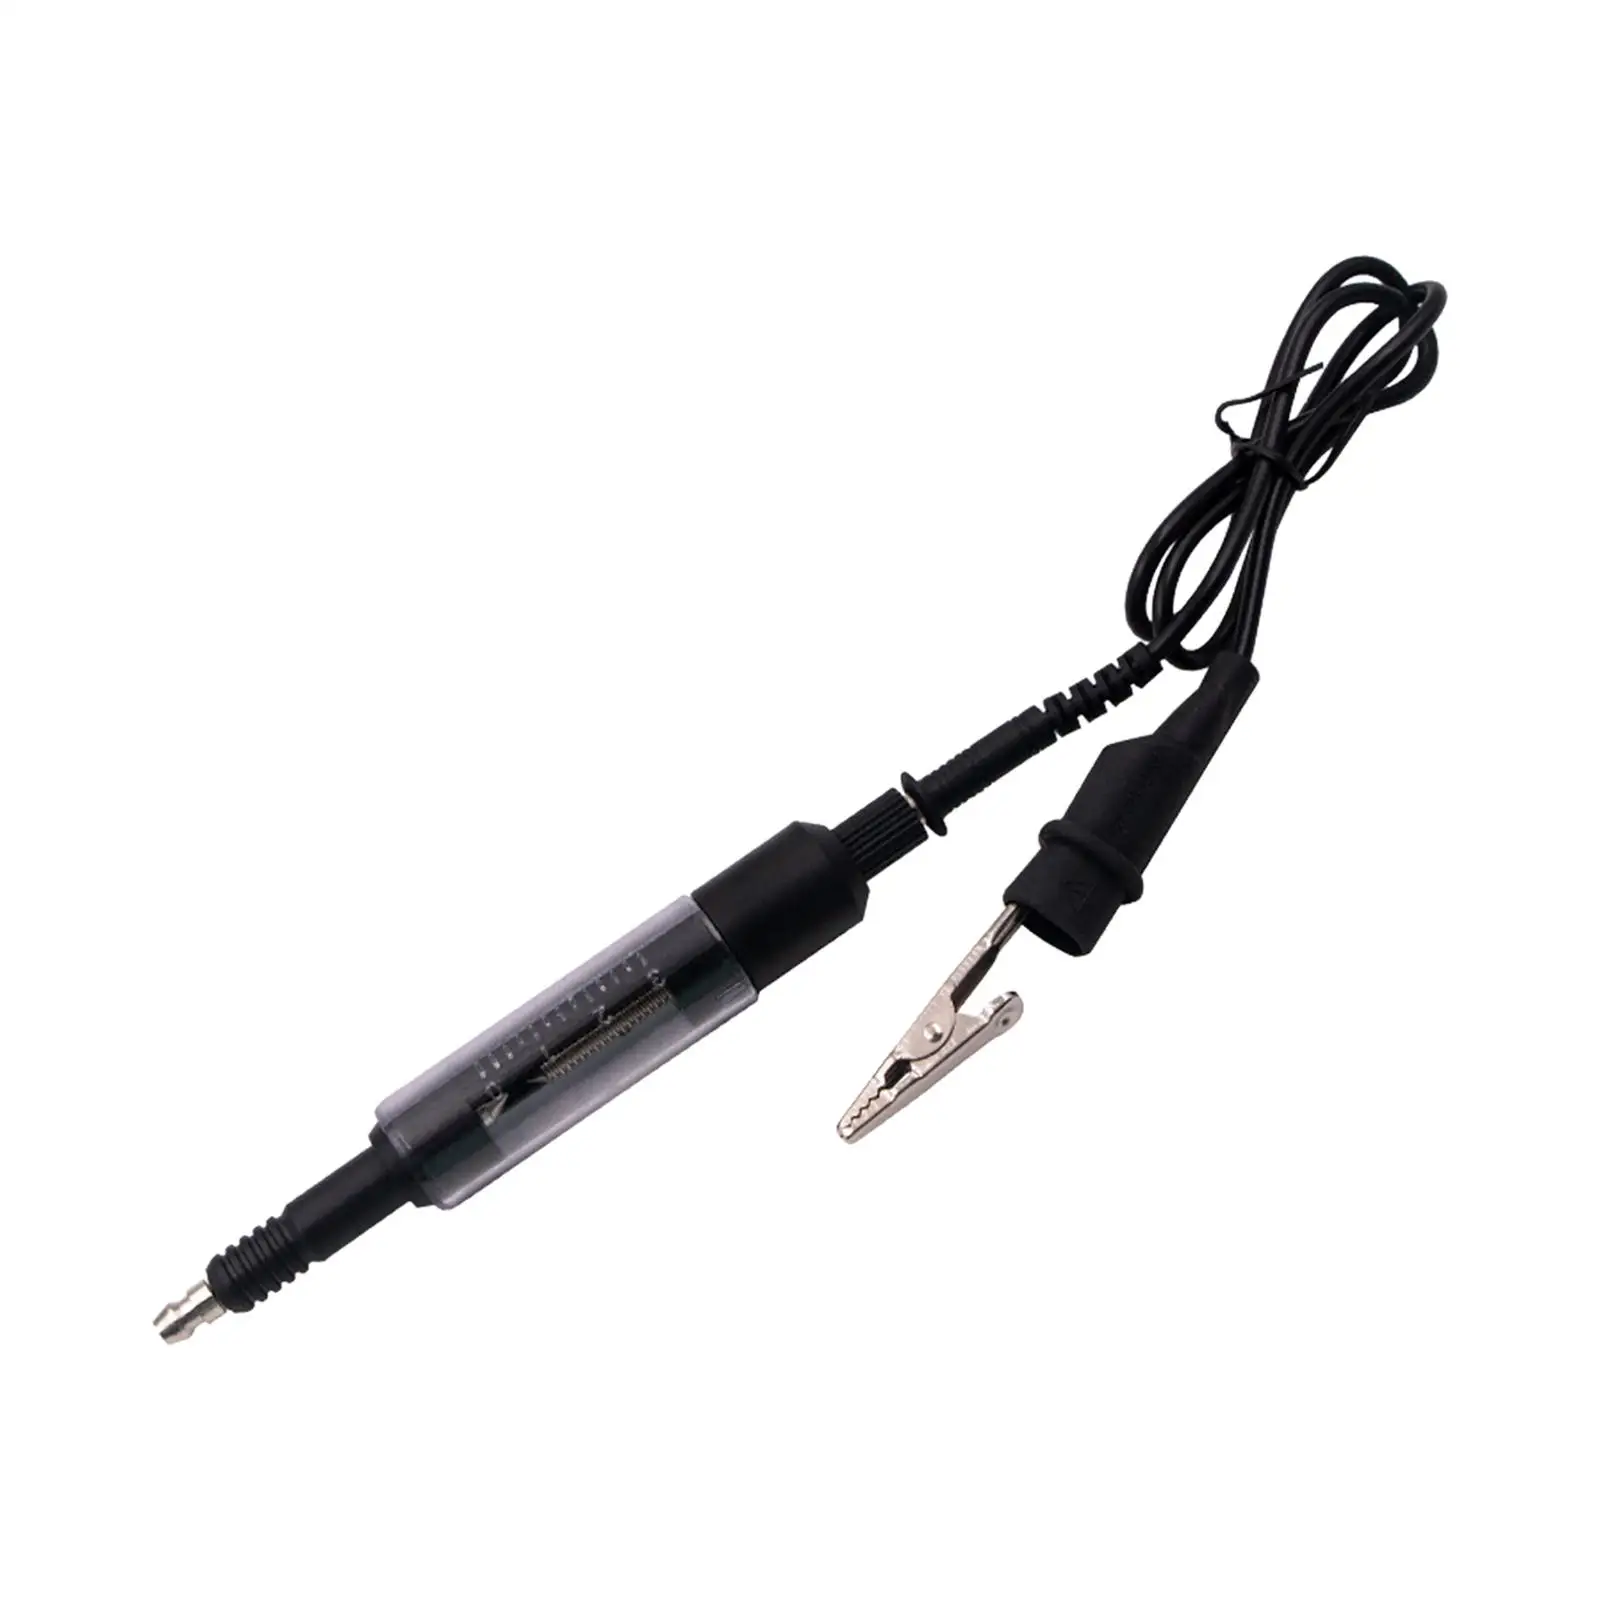 Ignition Coil Tester Spark Plug Tester Vehicles for All Ignition Systems images - 6